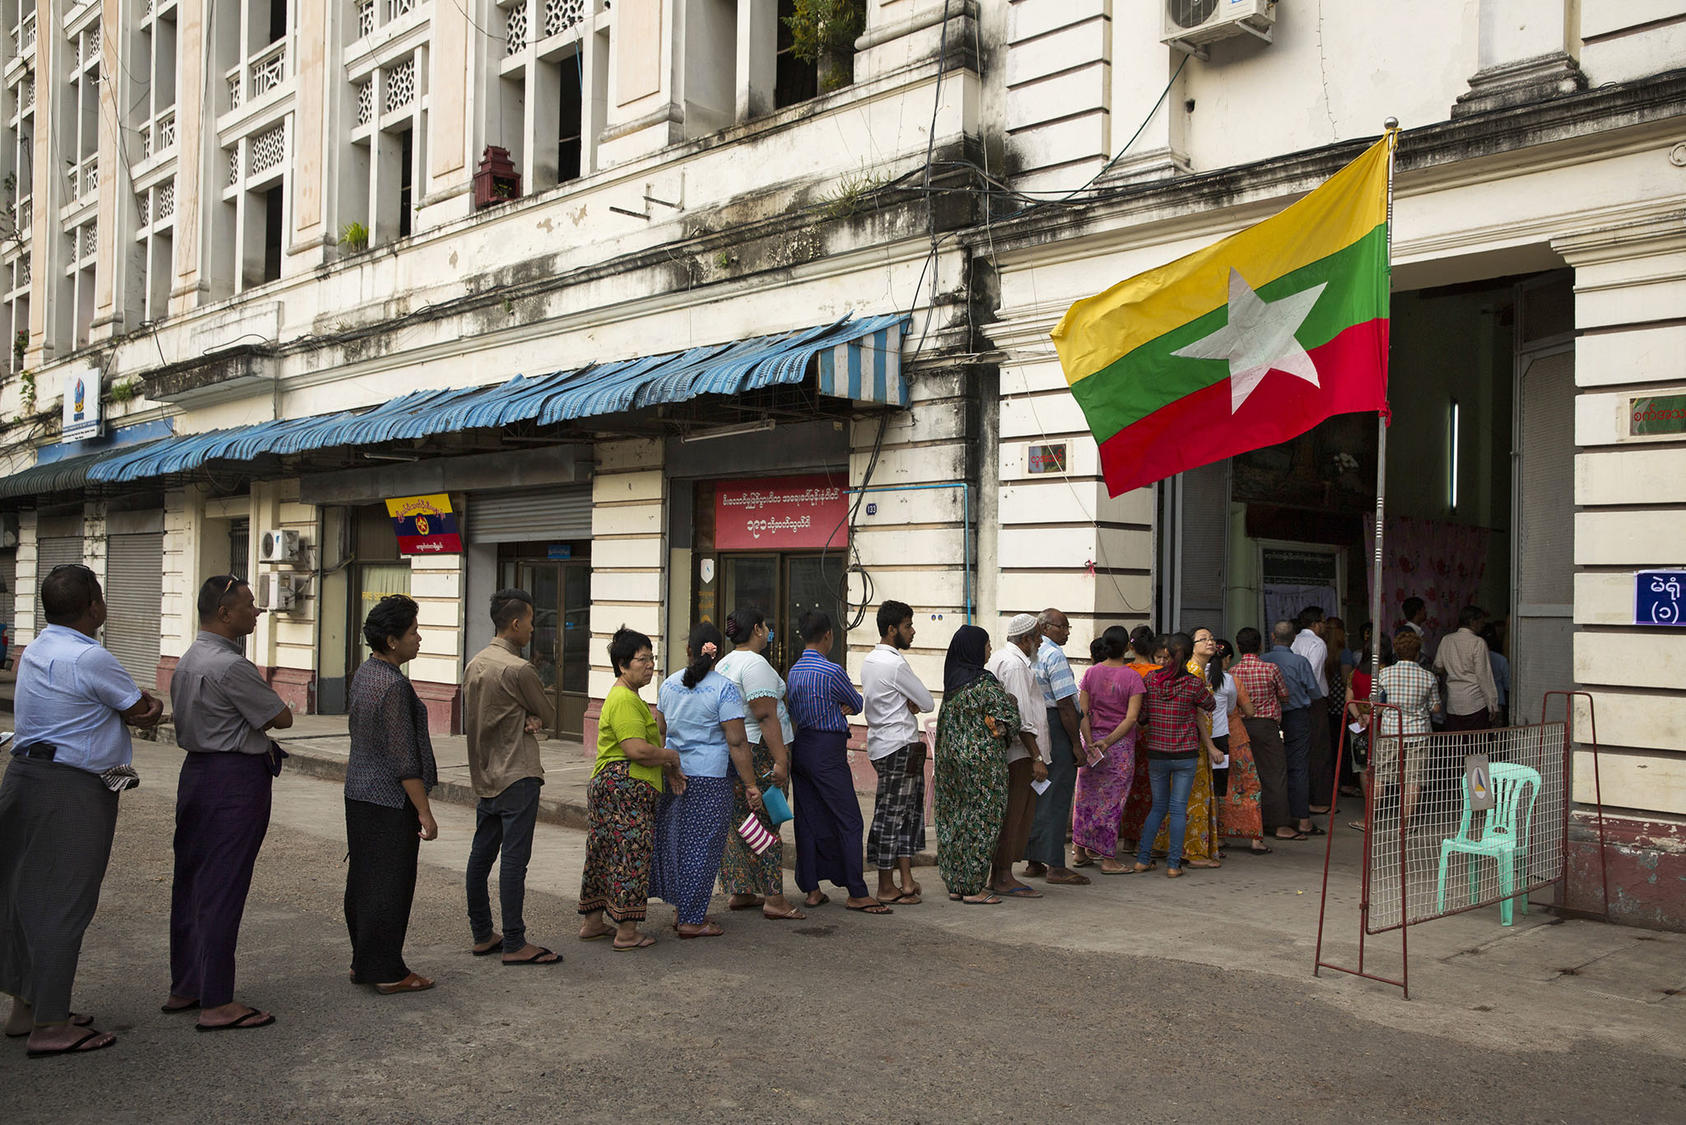 Voters line up outside a polling station in Yangon, Myanmar. Nov. 8, 2015. (Adam Dean/The New York Times)